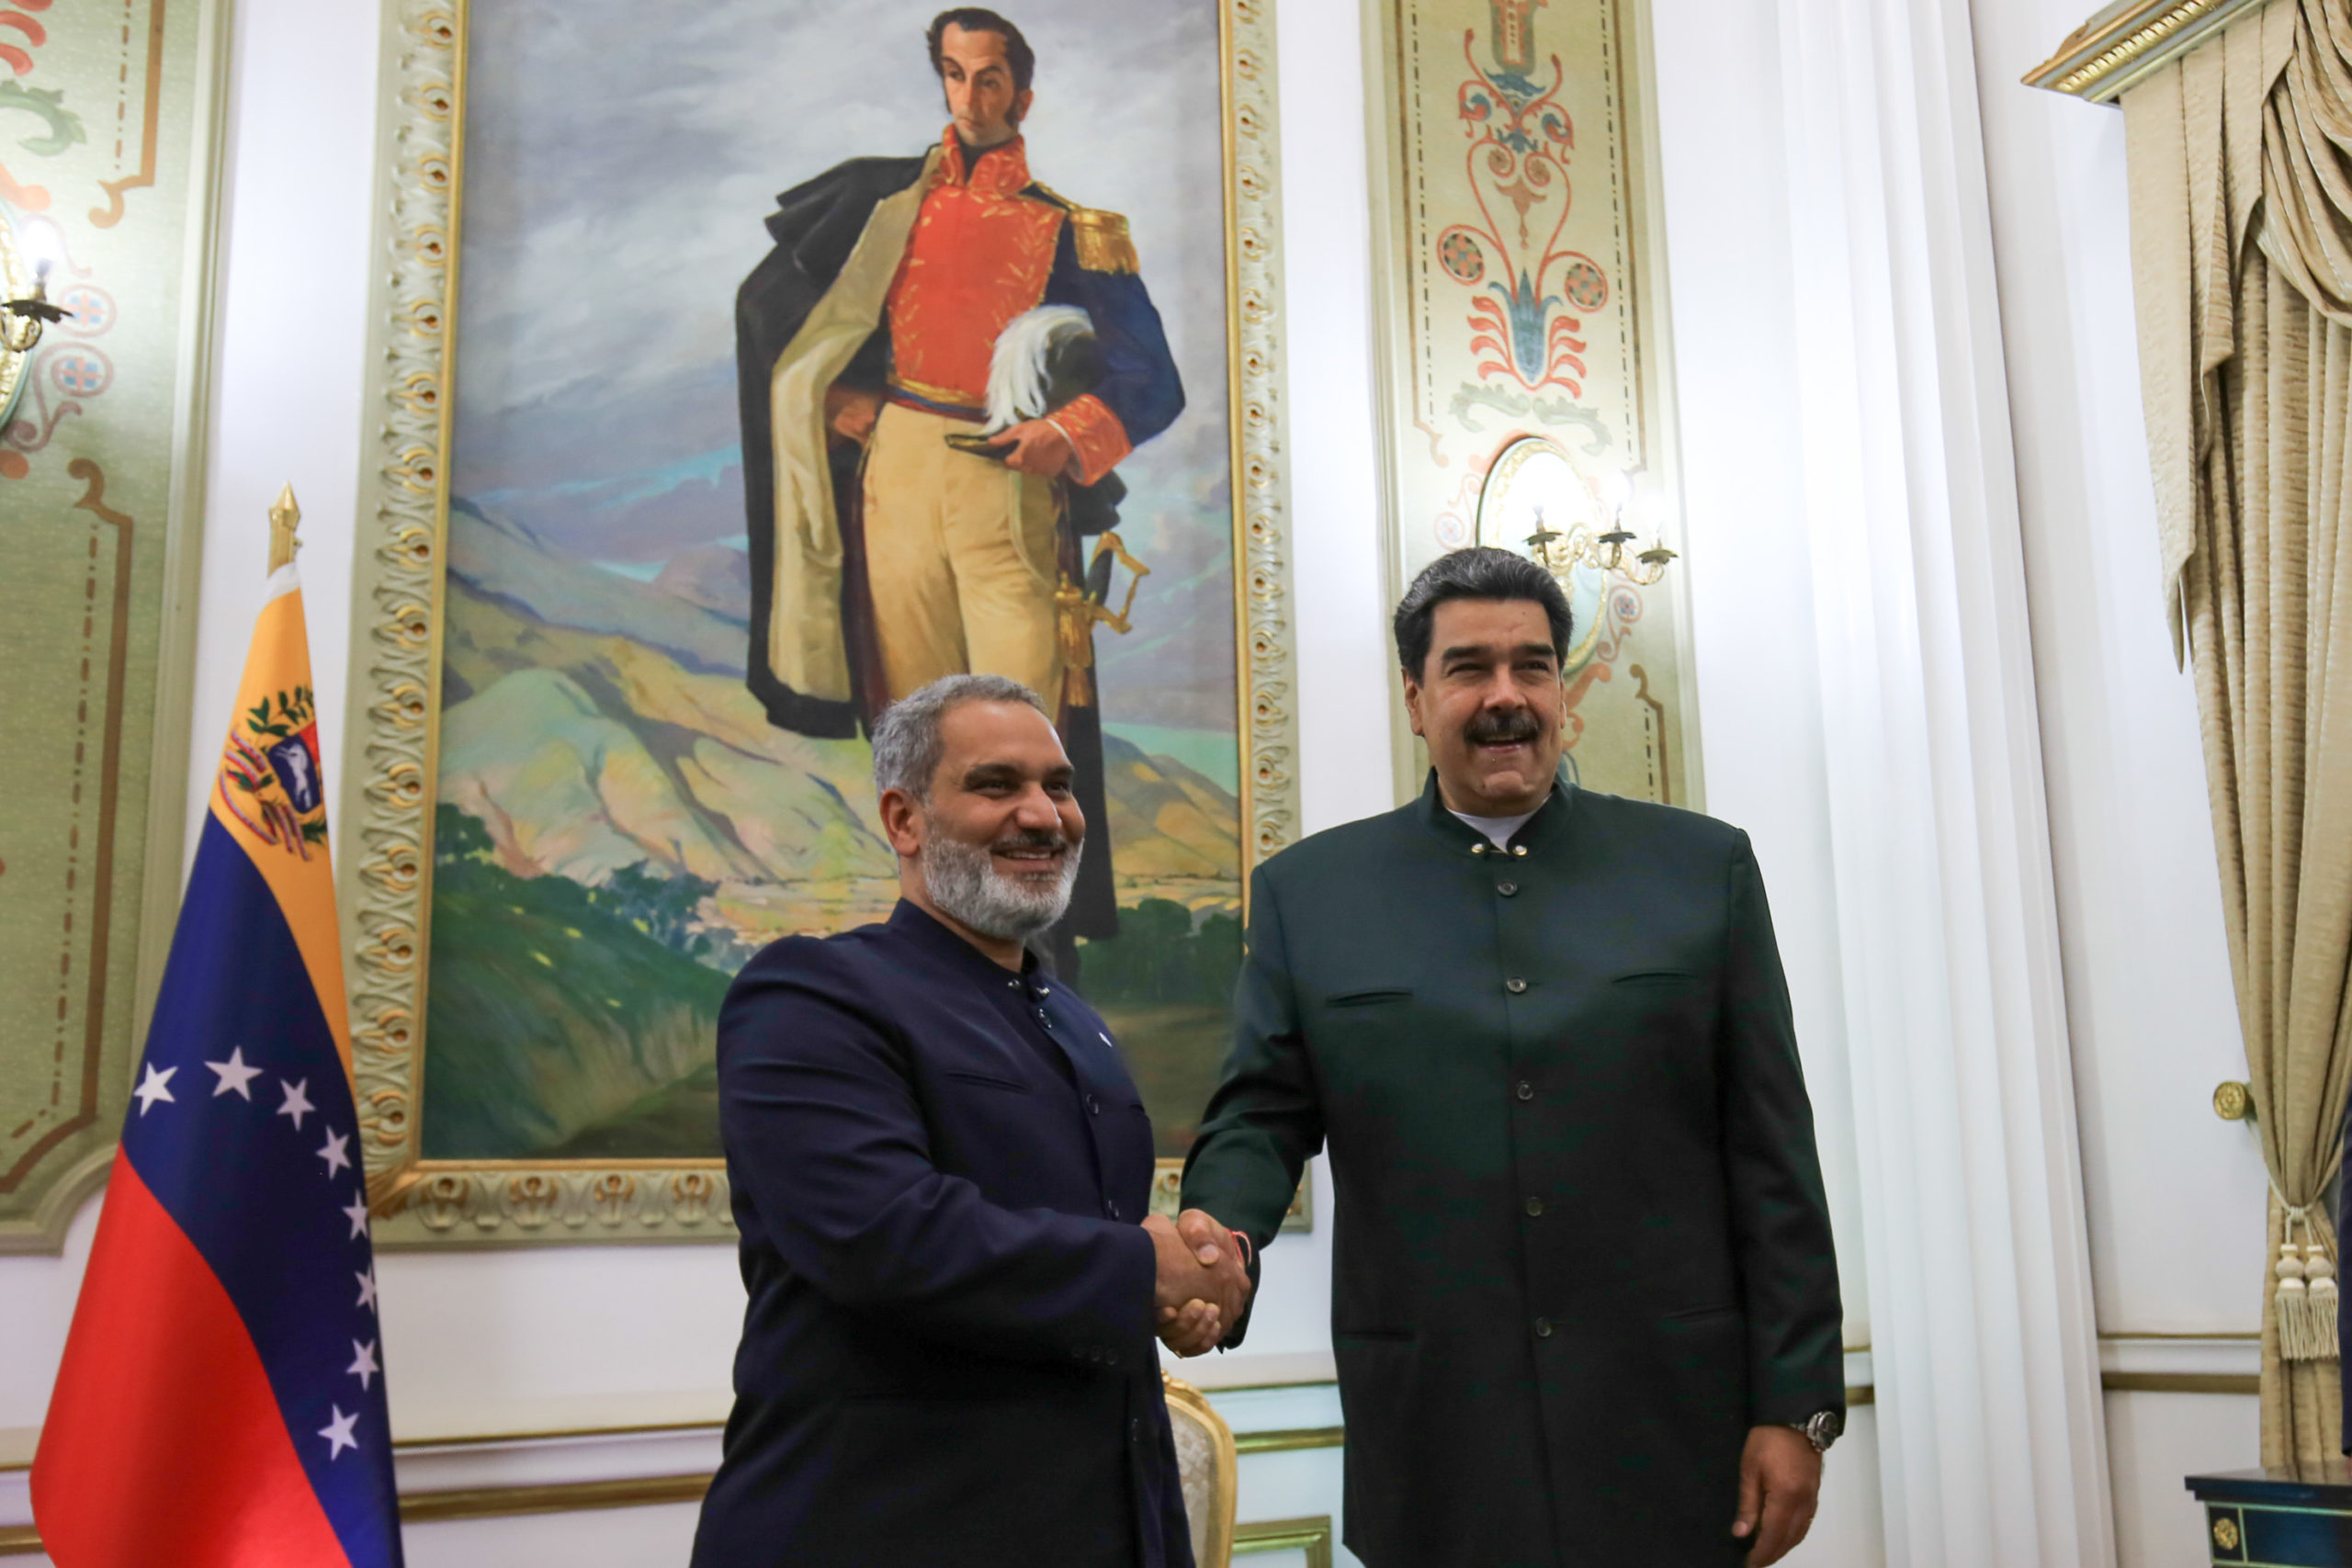 President Maduro received the secretary general of OPEC